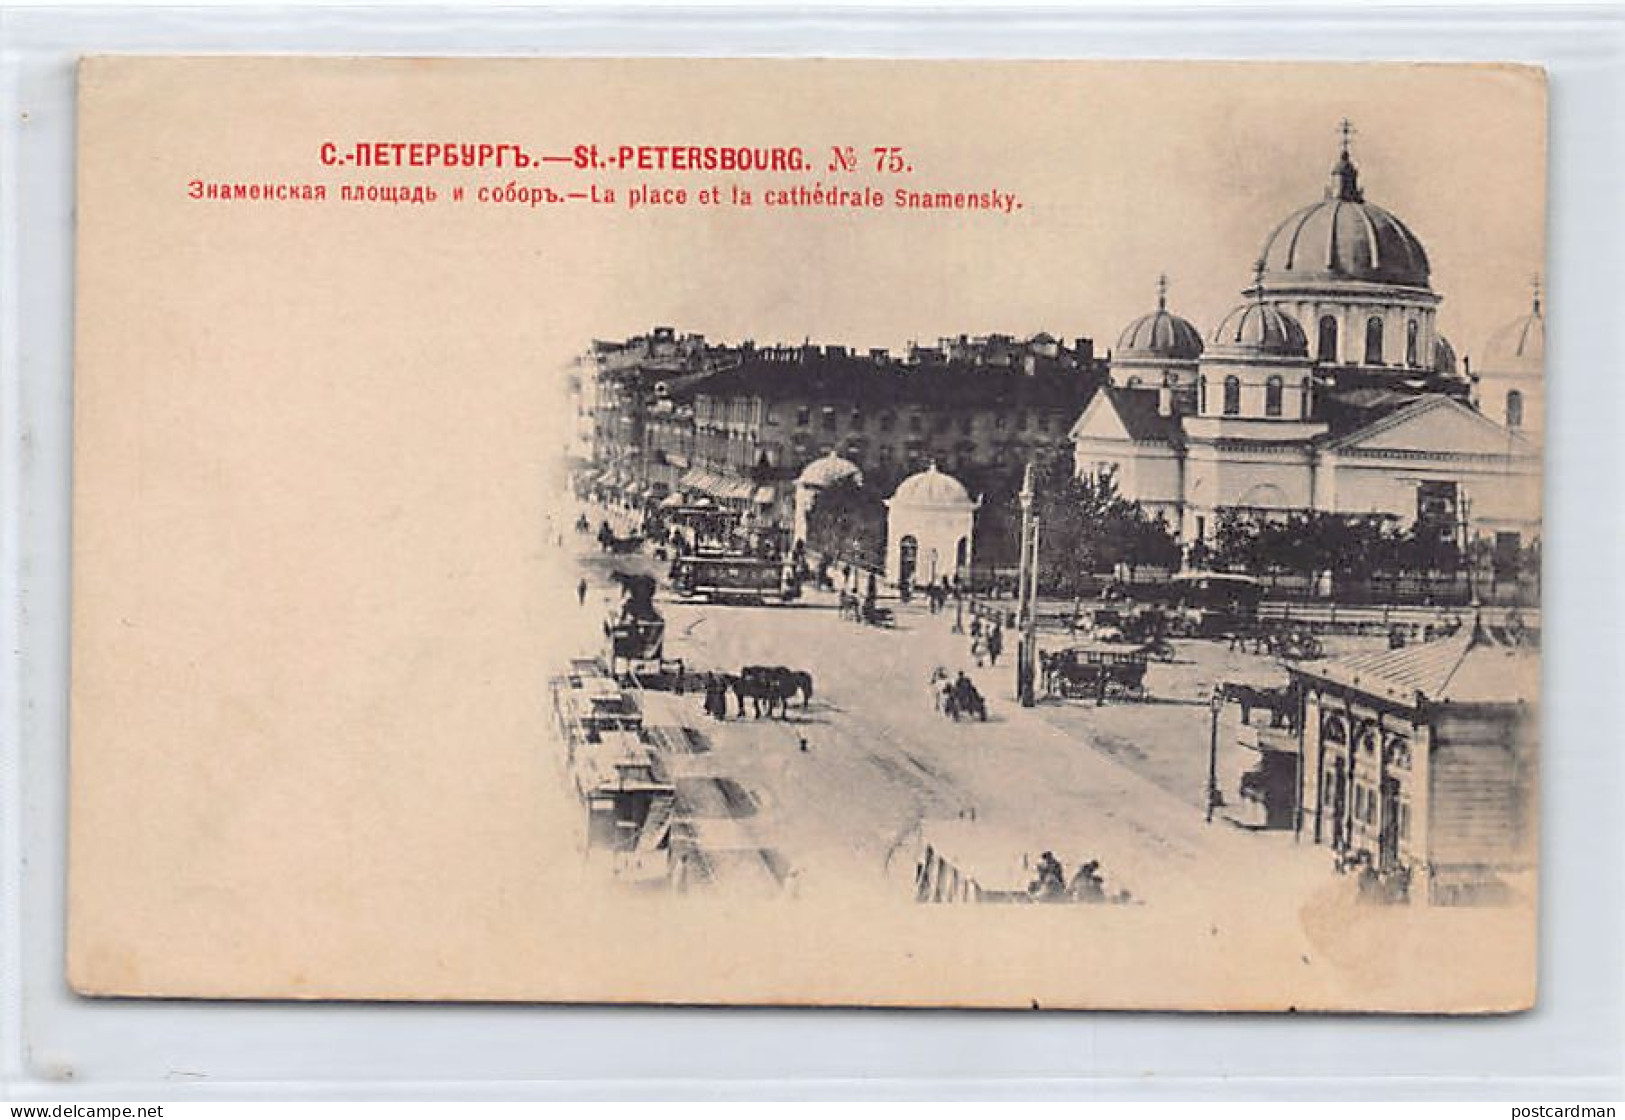 Russia - ST. PETERSBURG - Znamenskaya Square - Church Of The Sign - Publ. Scherer, Nabholz And Co. - Year 1902 75 - Rusia